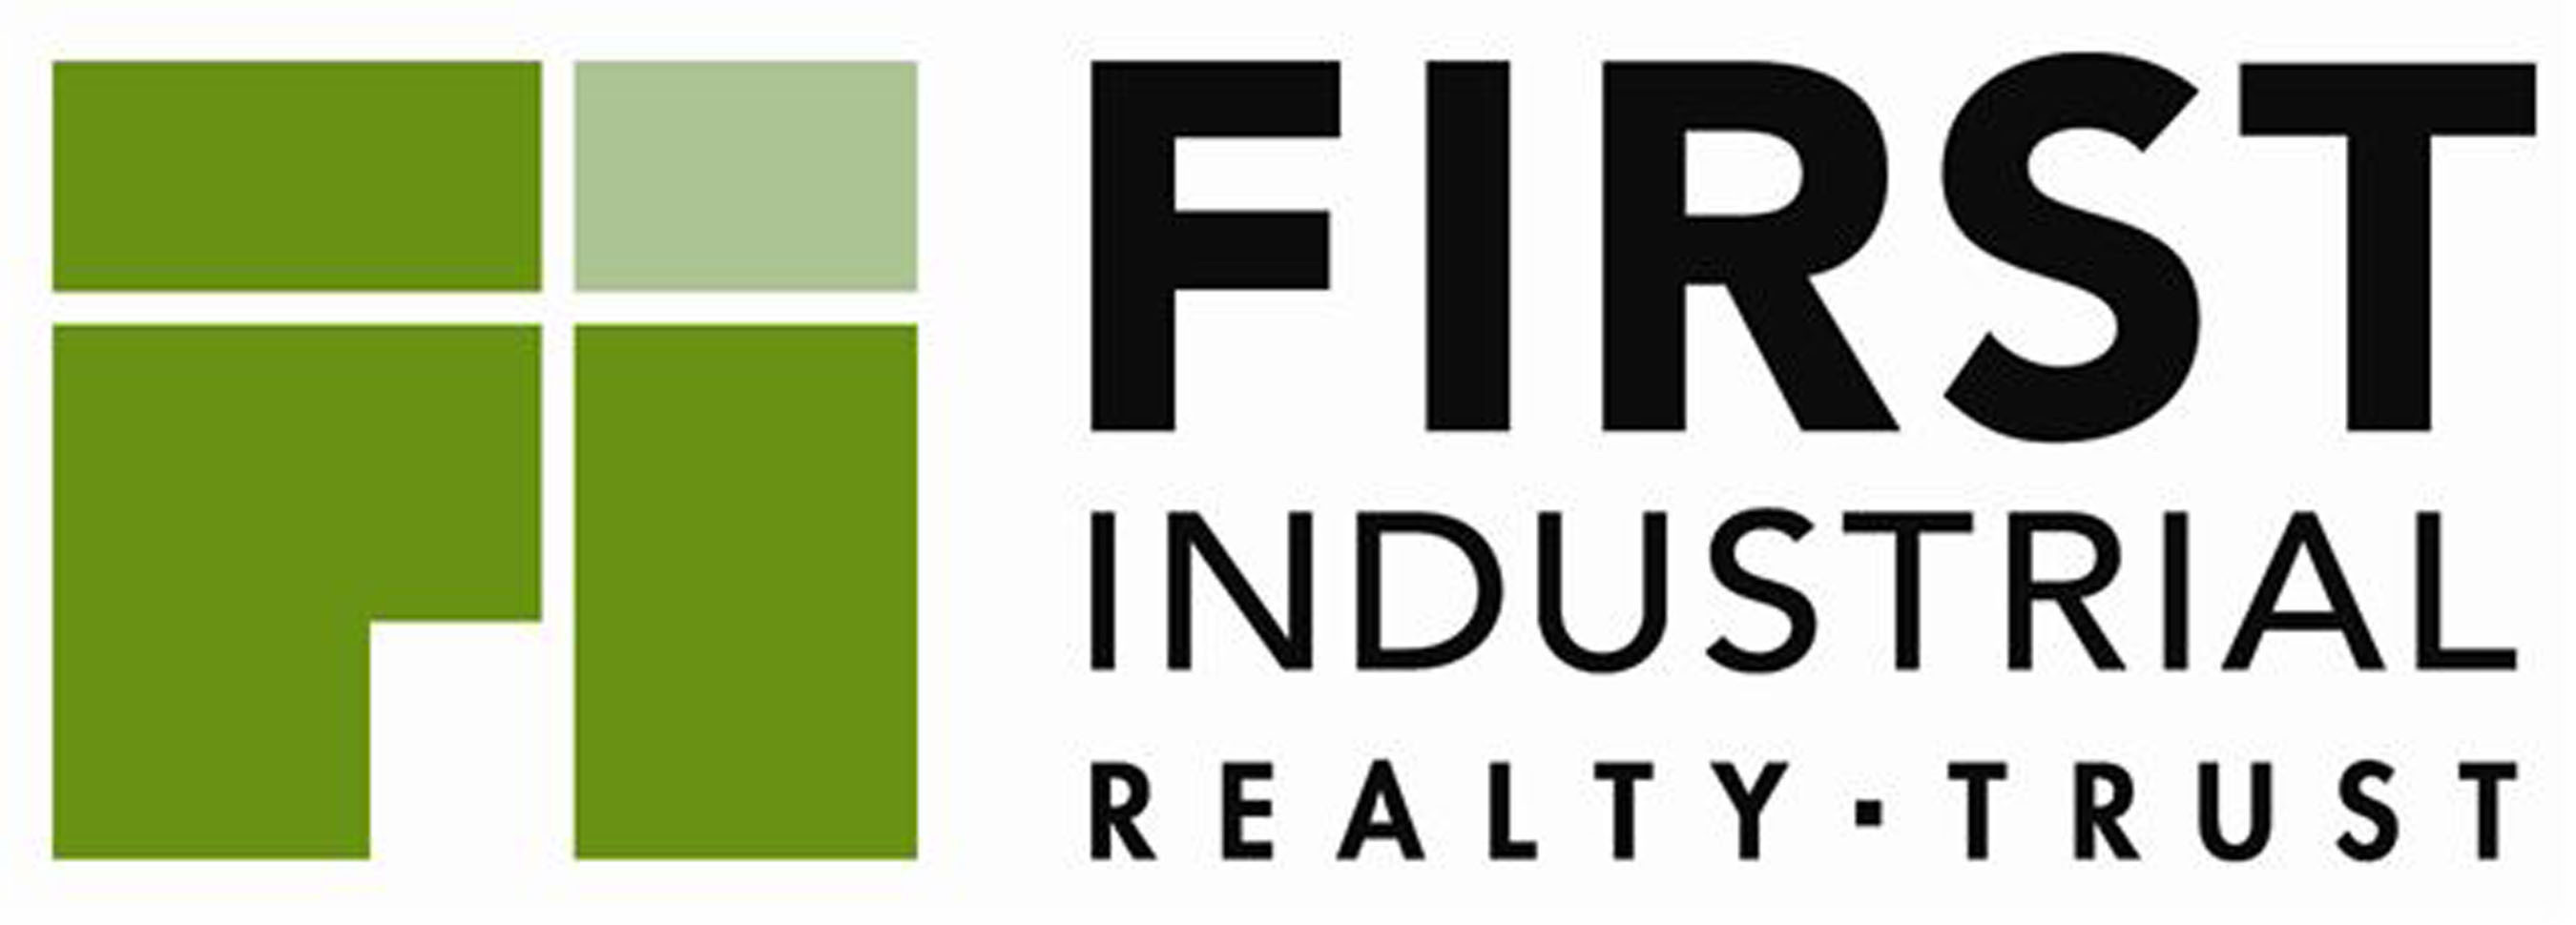 First Industrial Realty Trust logo.